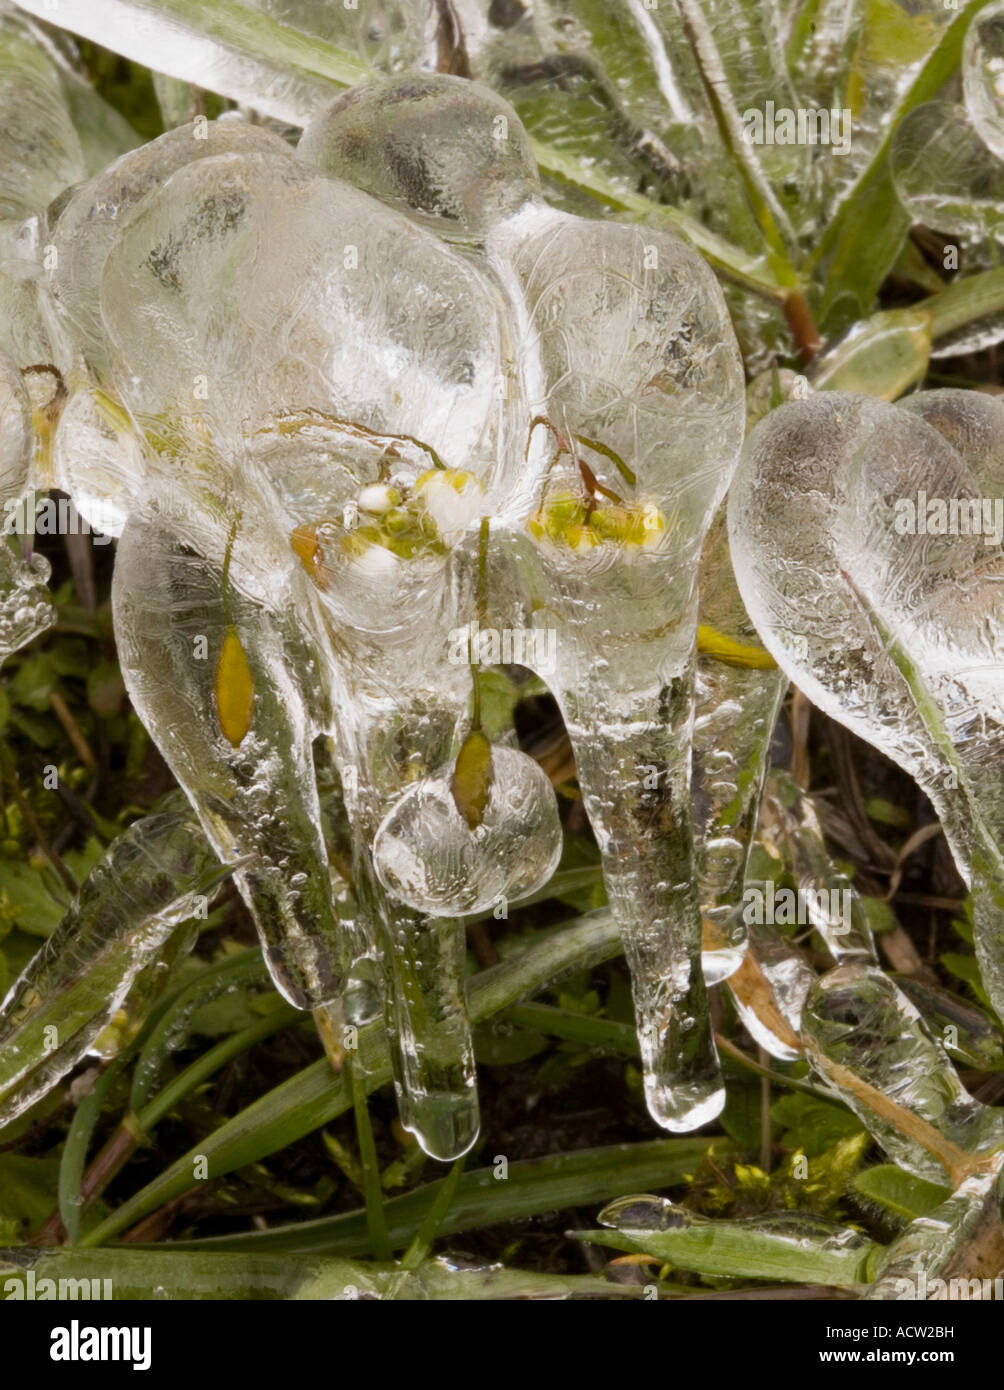 Ice surrounds an early spring flower and assumes a tooth-like appearance Stock Photo